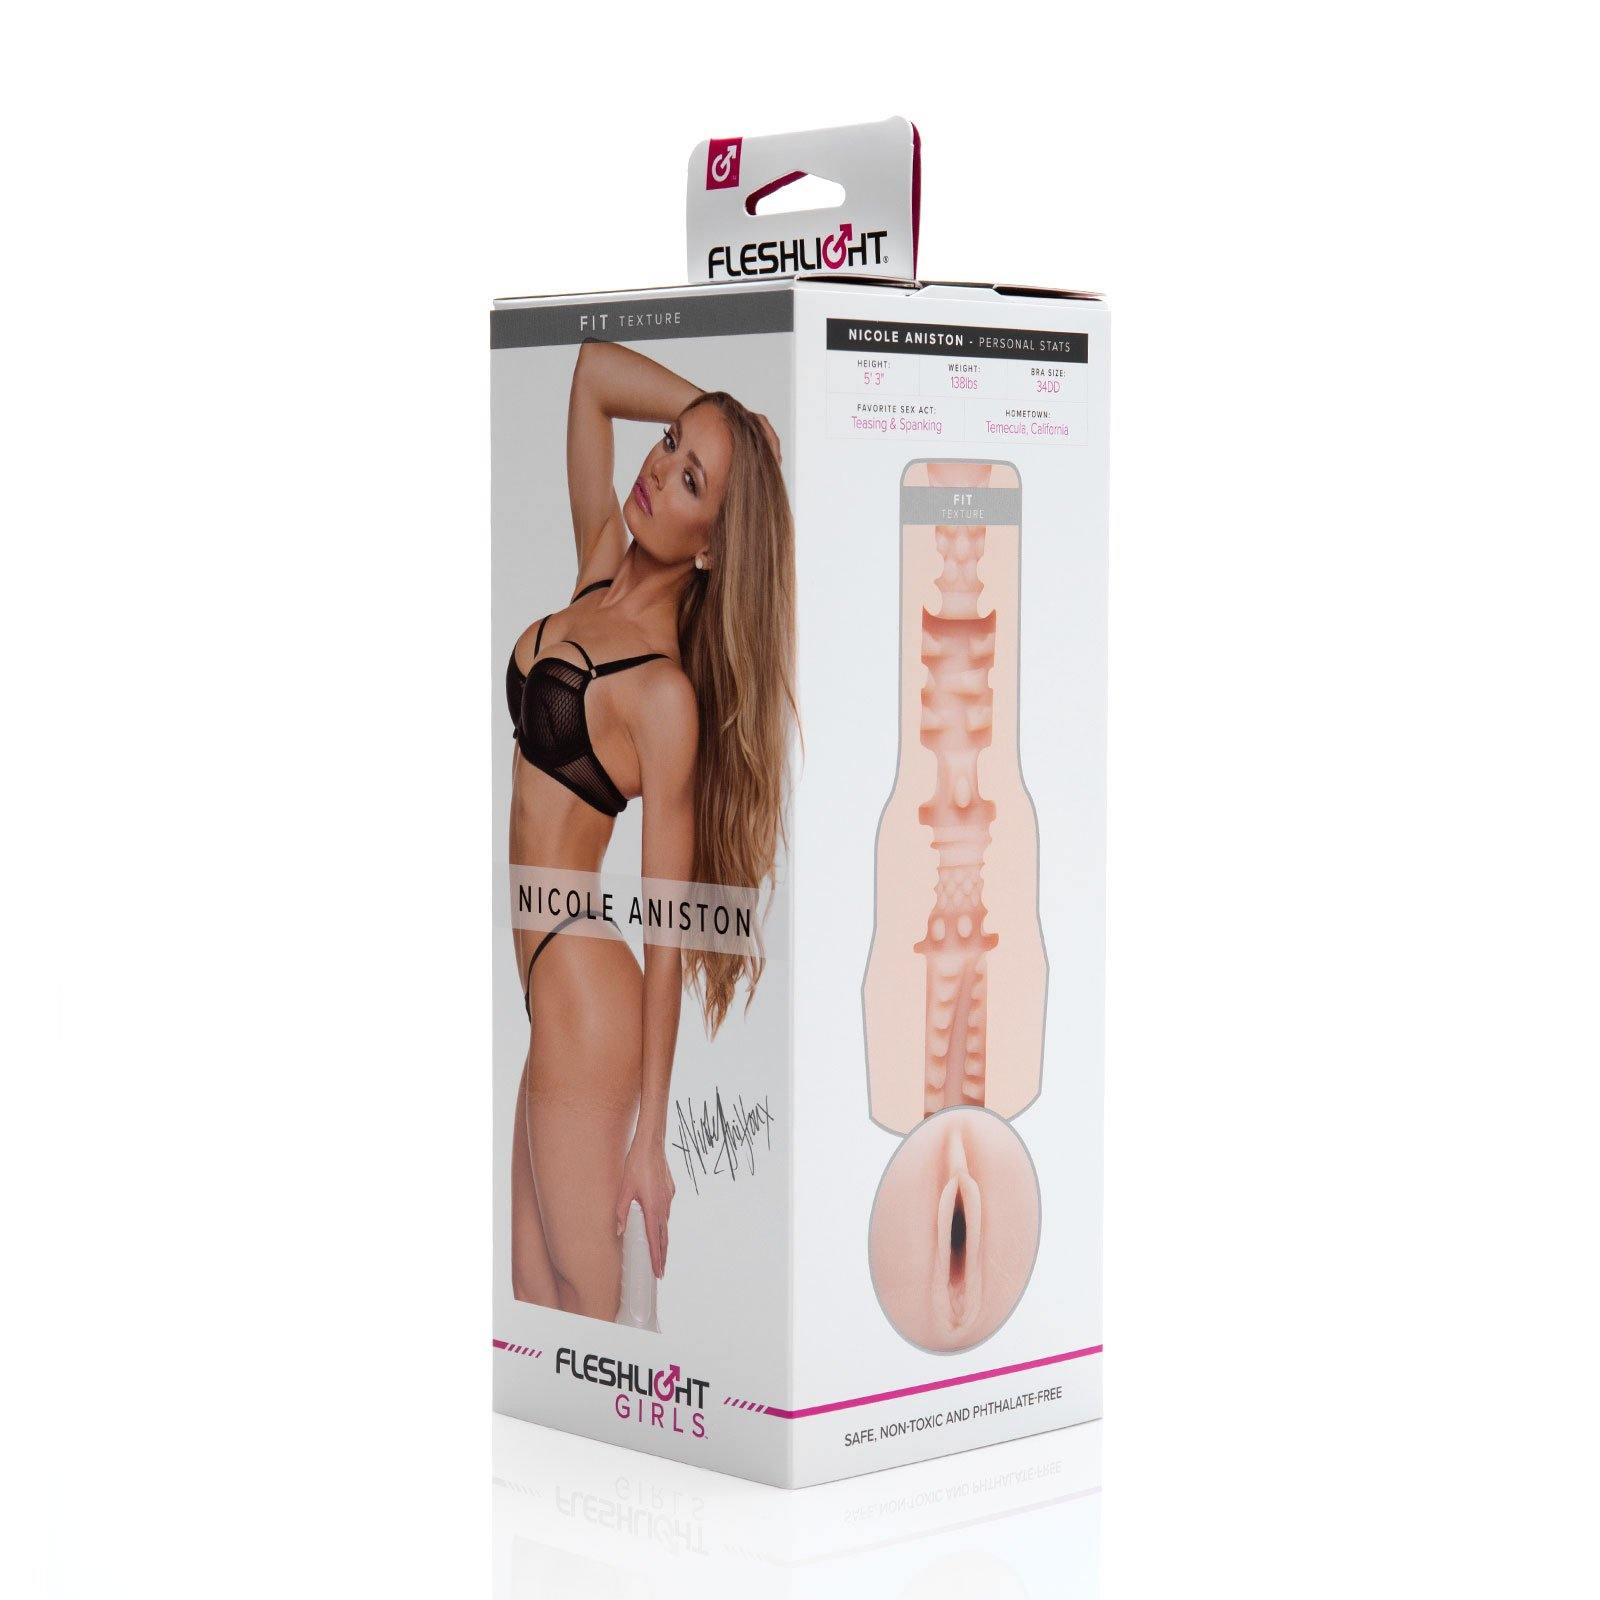 Fleshlight Girls Nicole Aniston Fit - Buy At Luxury Toy X - Free 3-Day Shipping